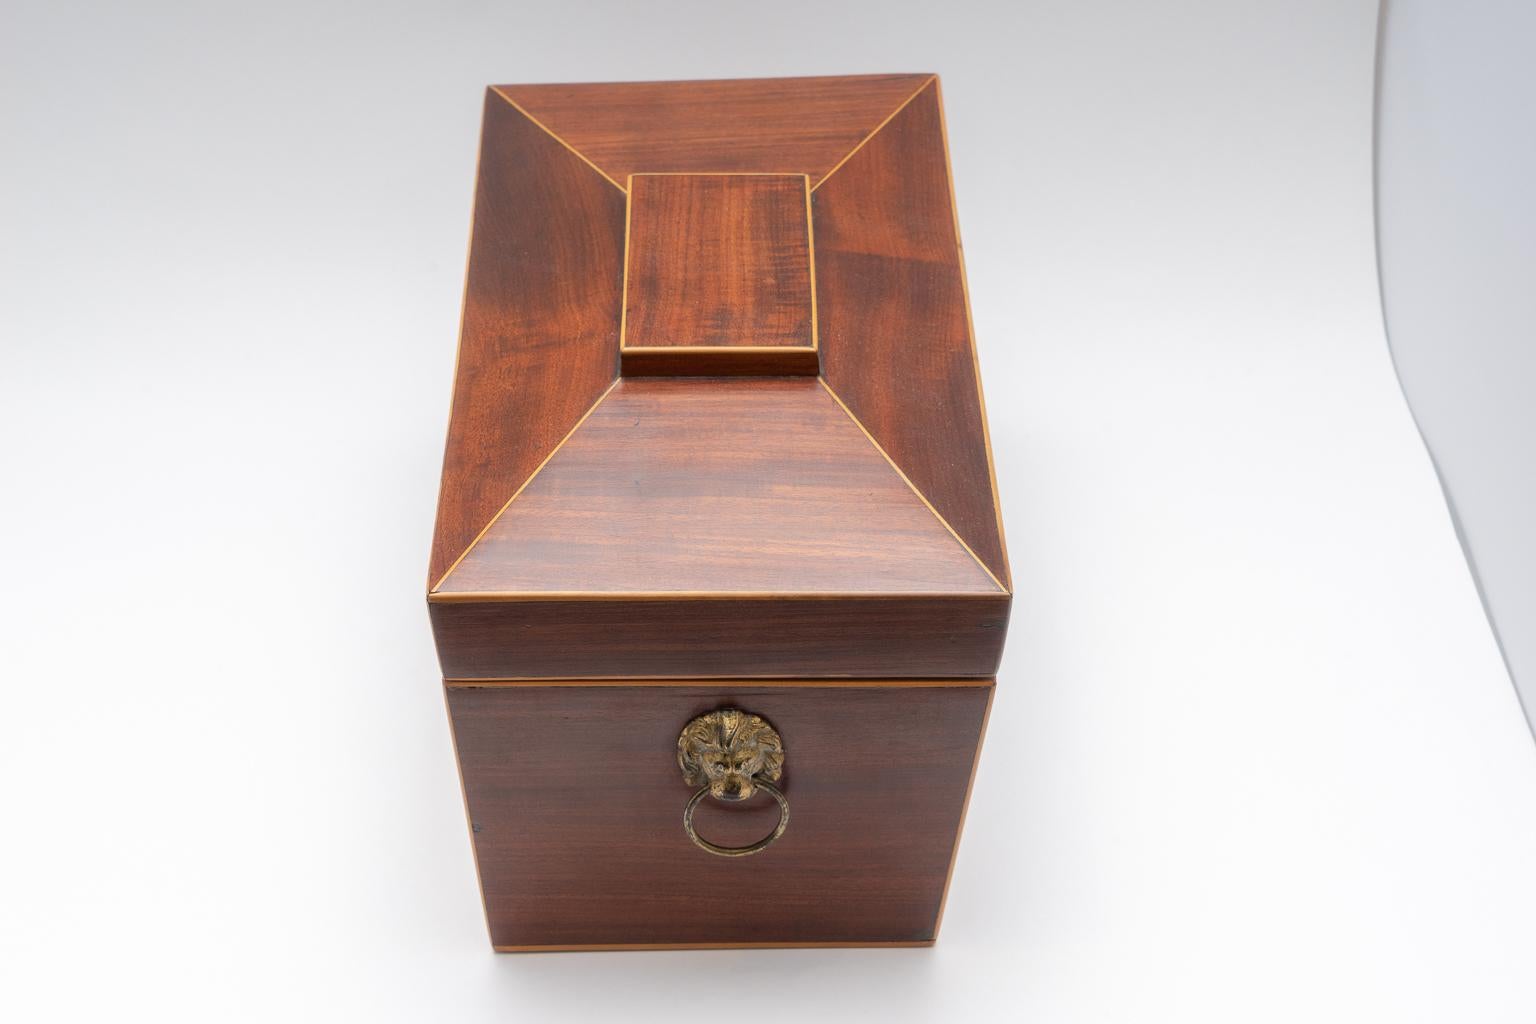 This stylish English Regency tea caddy was acquired from a Palm Beach estate and will make a great addition to your collection or perhaps to start a new collection. And of course to use simply as an item of beauty and elegance.